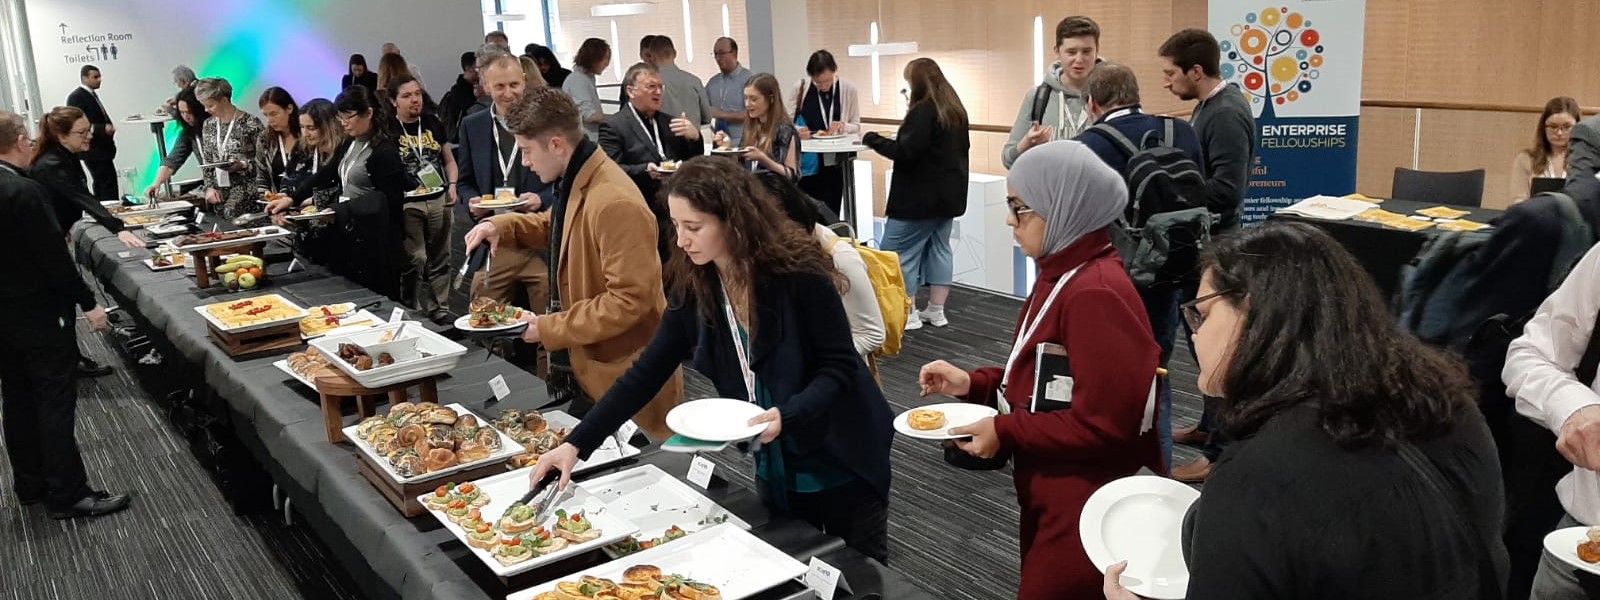 Delegates enjoying a buffet lunch at a conference in the Technology and Innovation Centre